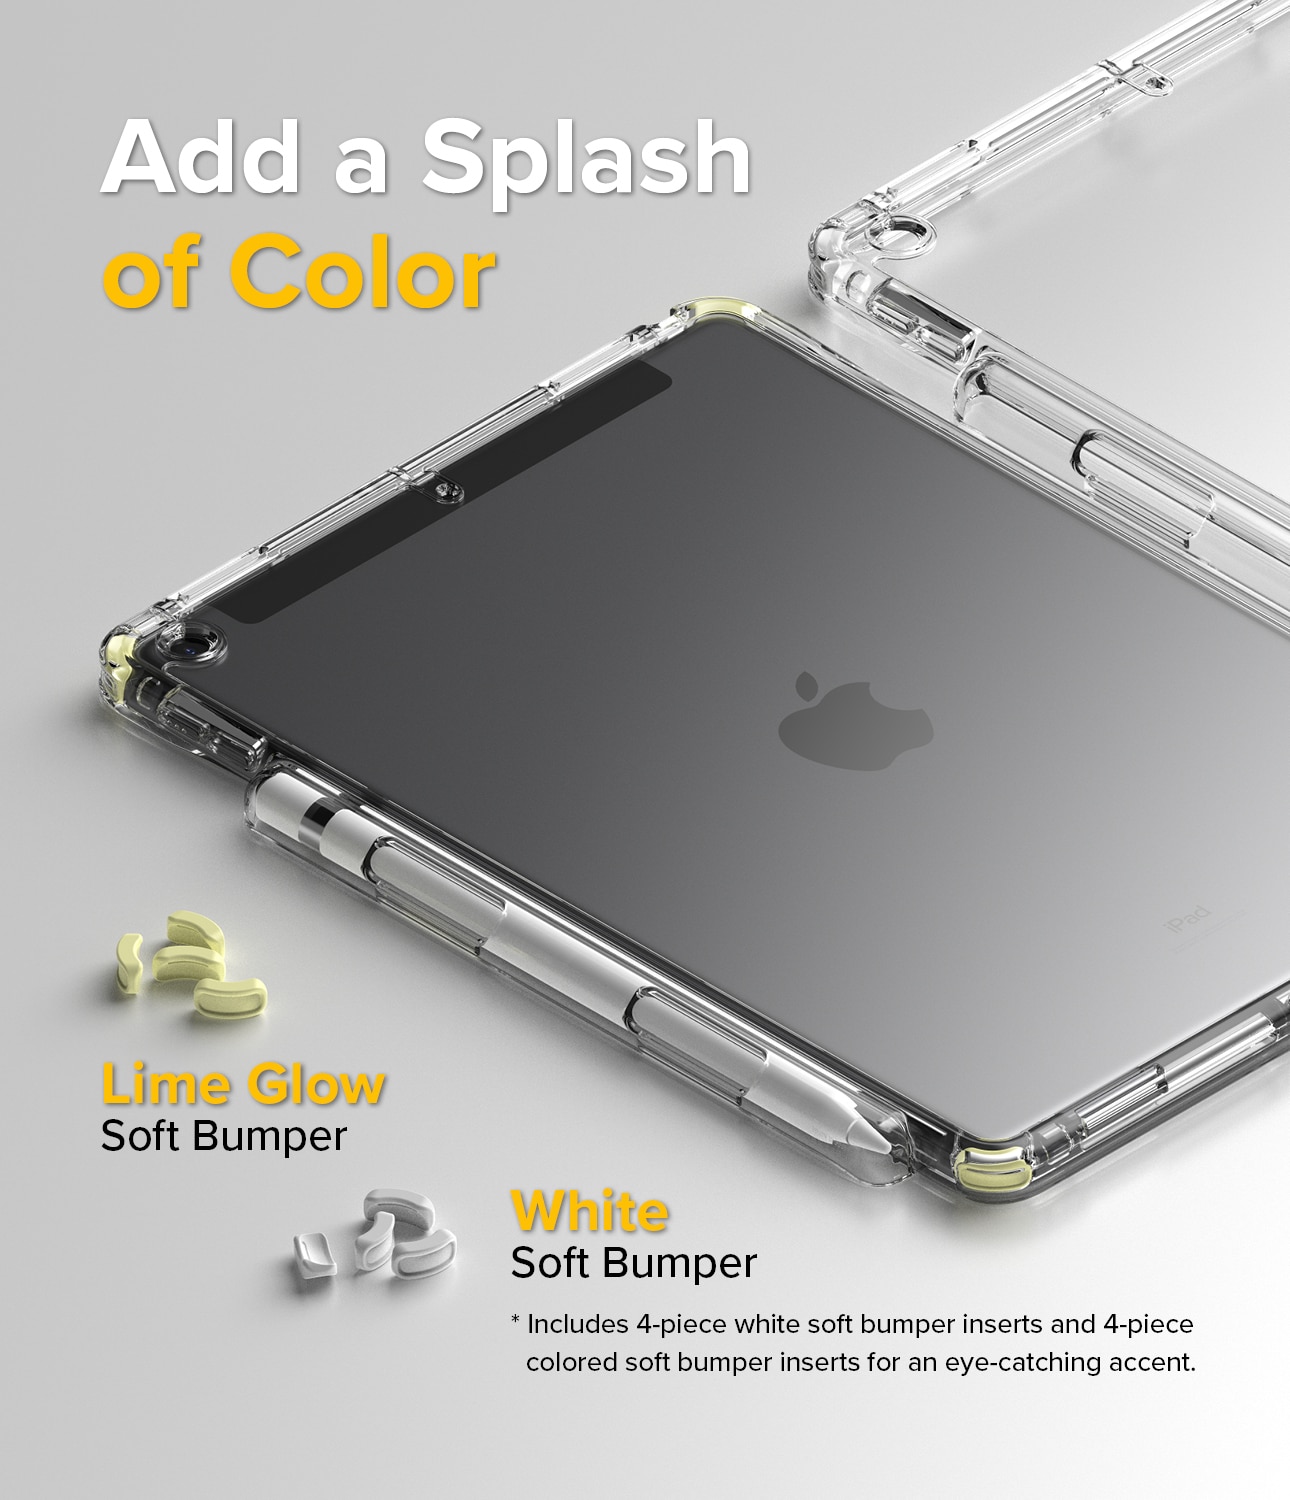 Cover Fusion Plus iPad 10.2 9th Gen (2021) White/Lime Glow